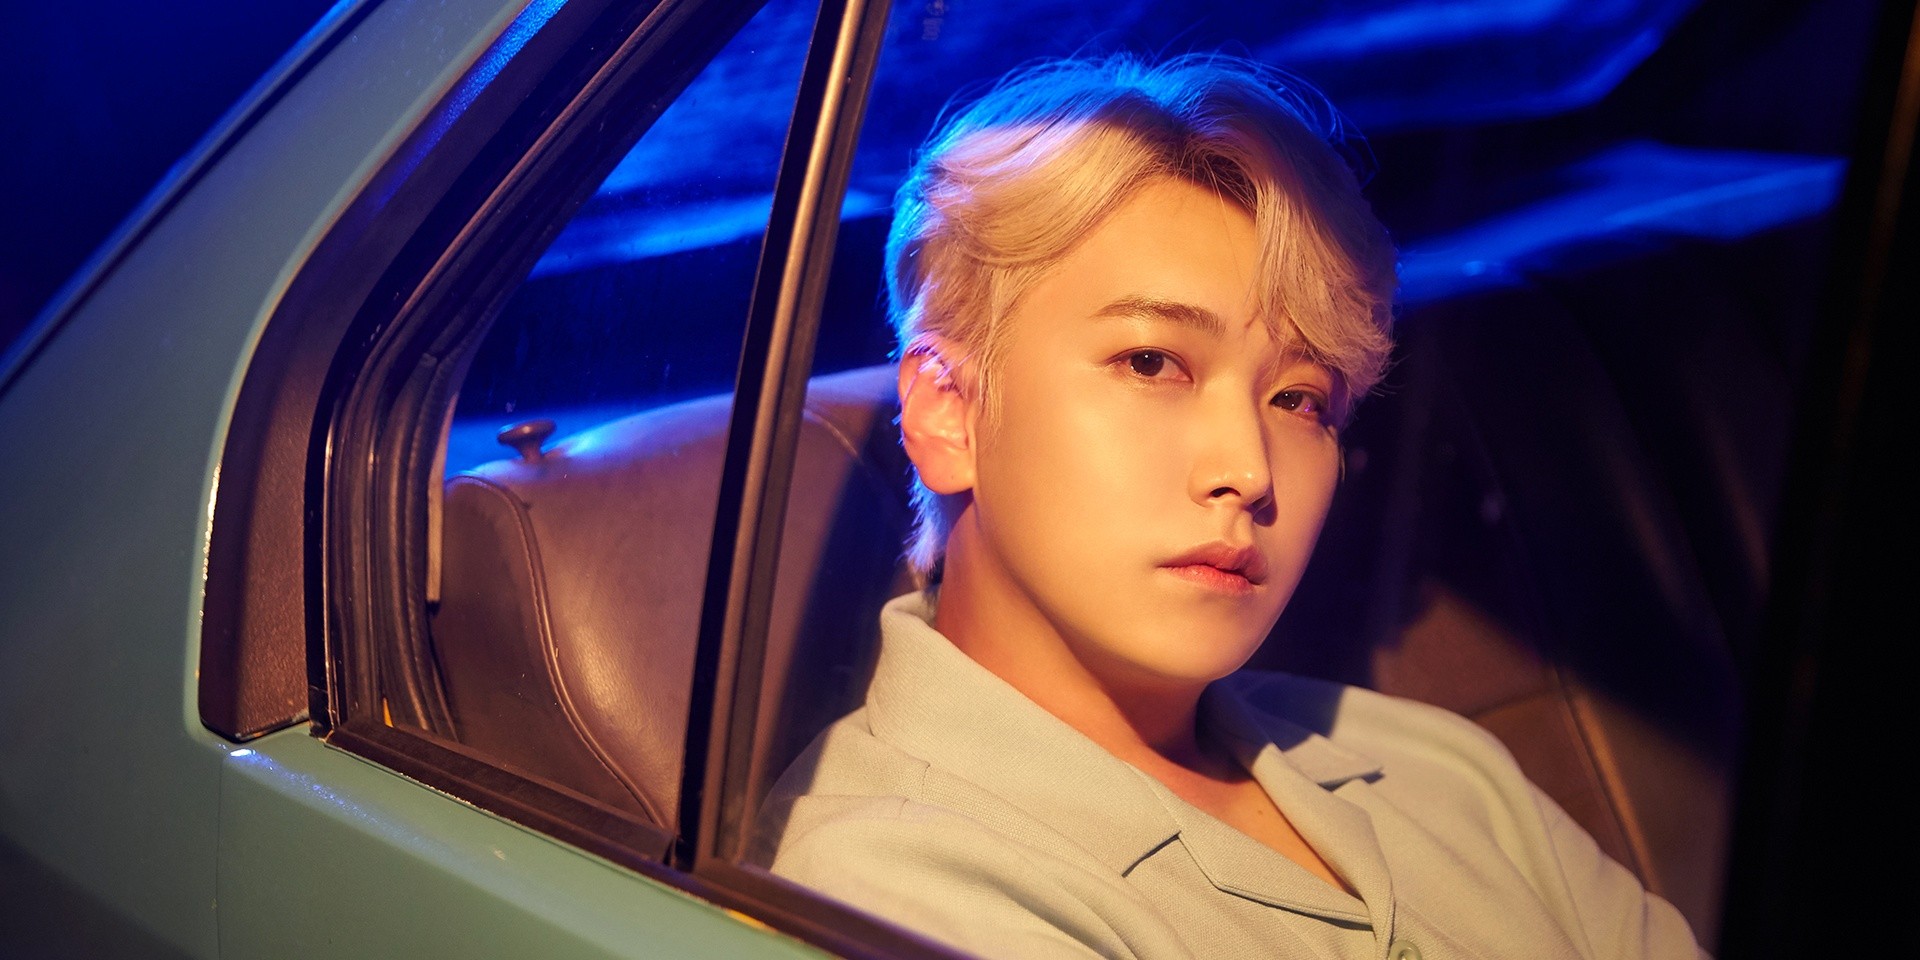 Super Junior's Sungmin to make solo comeback with 'Goodnight, Summer' in September